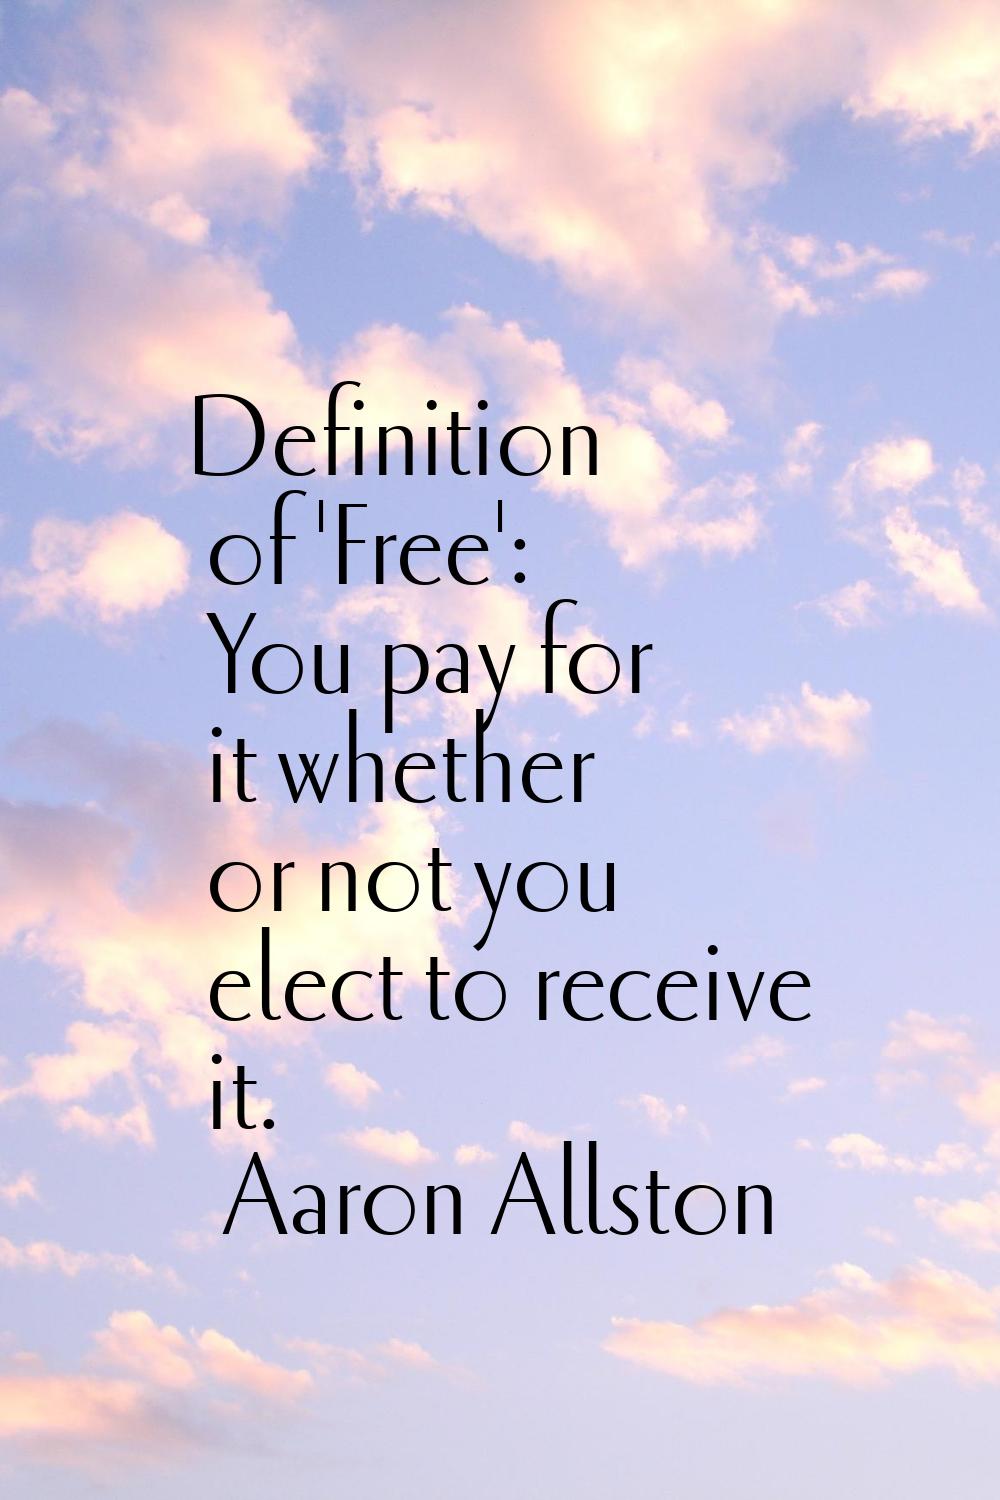 Definition of 'Free': You pay for it whether or not you elect to receive it.